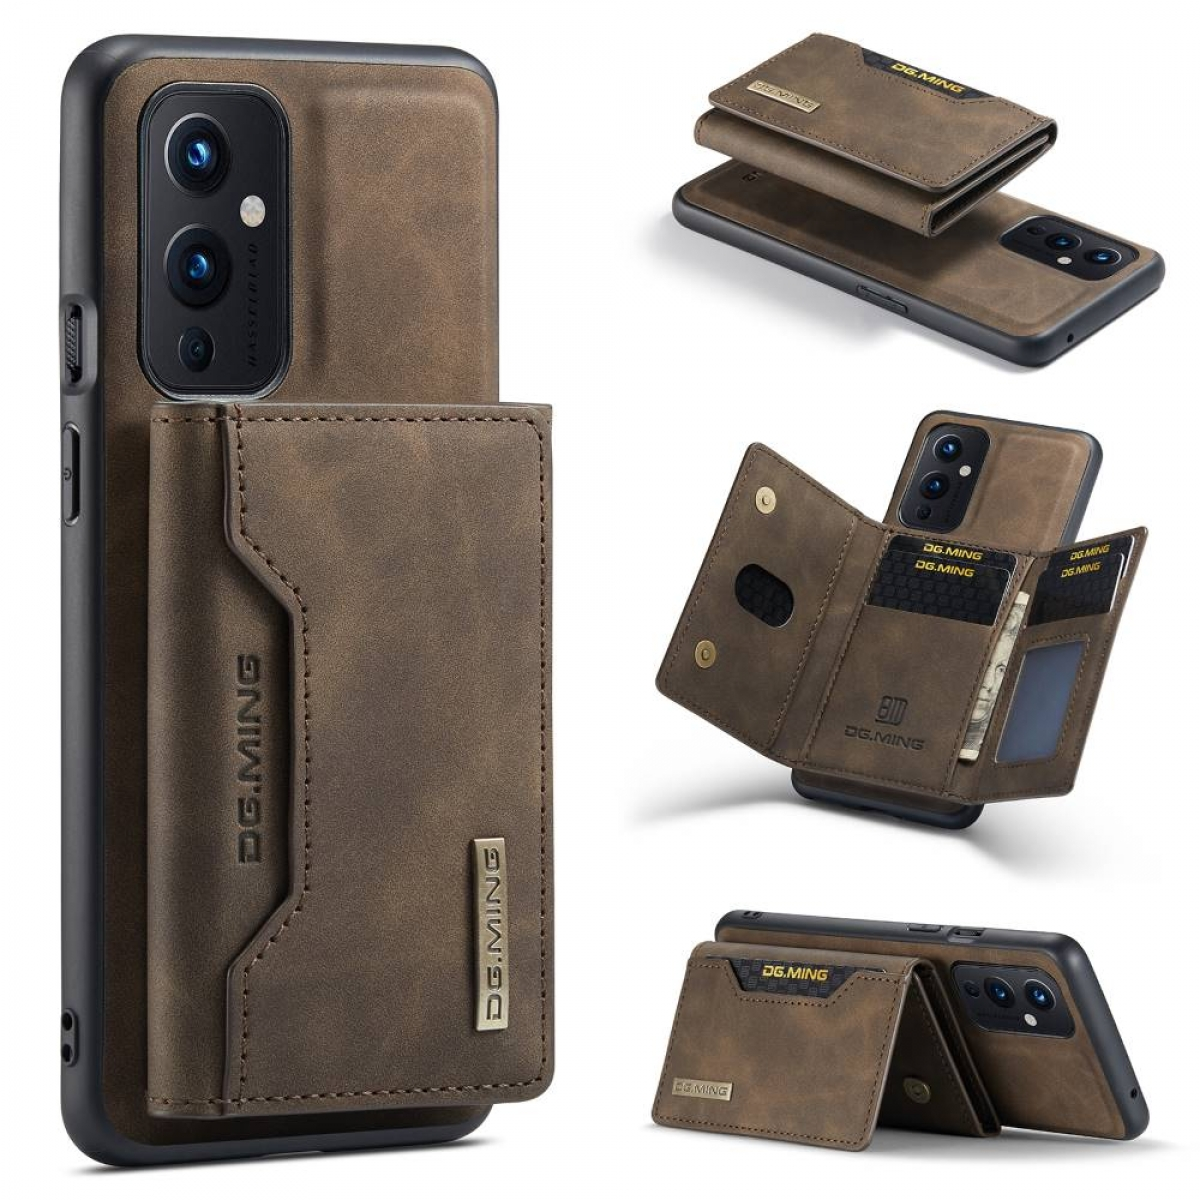 MING Backcover, OnePlus, M2 DG 2in1, Coffee 9,